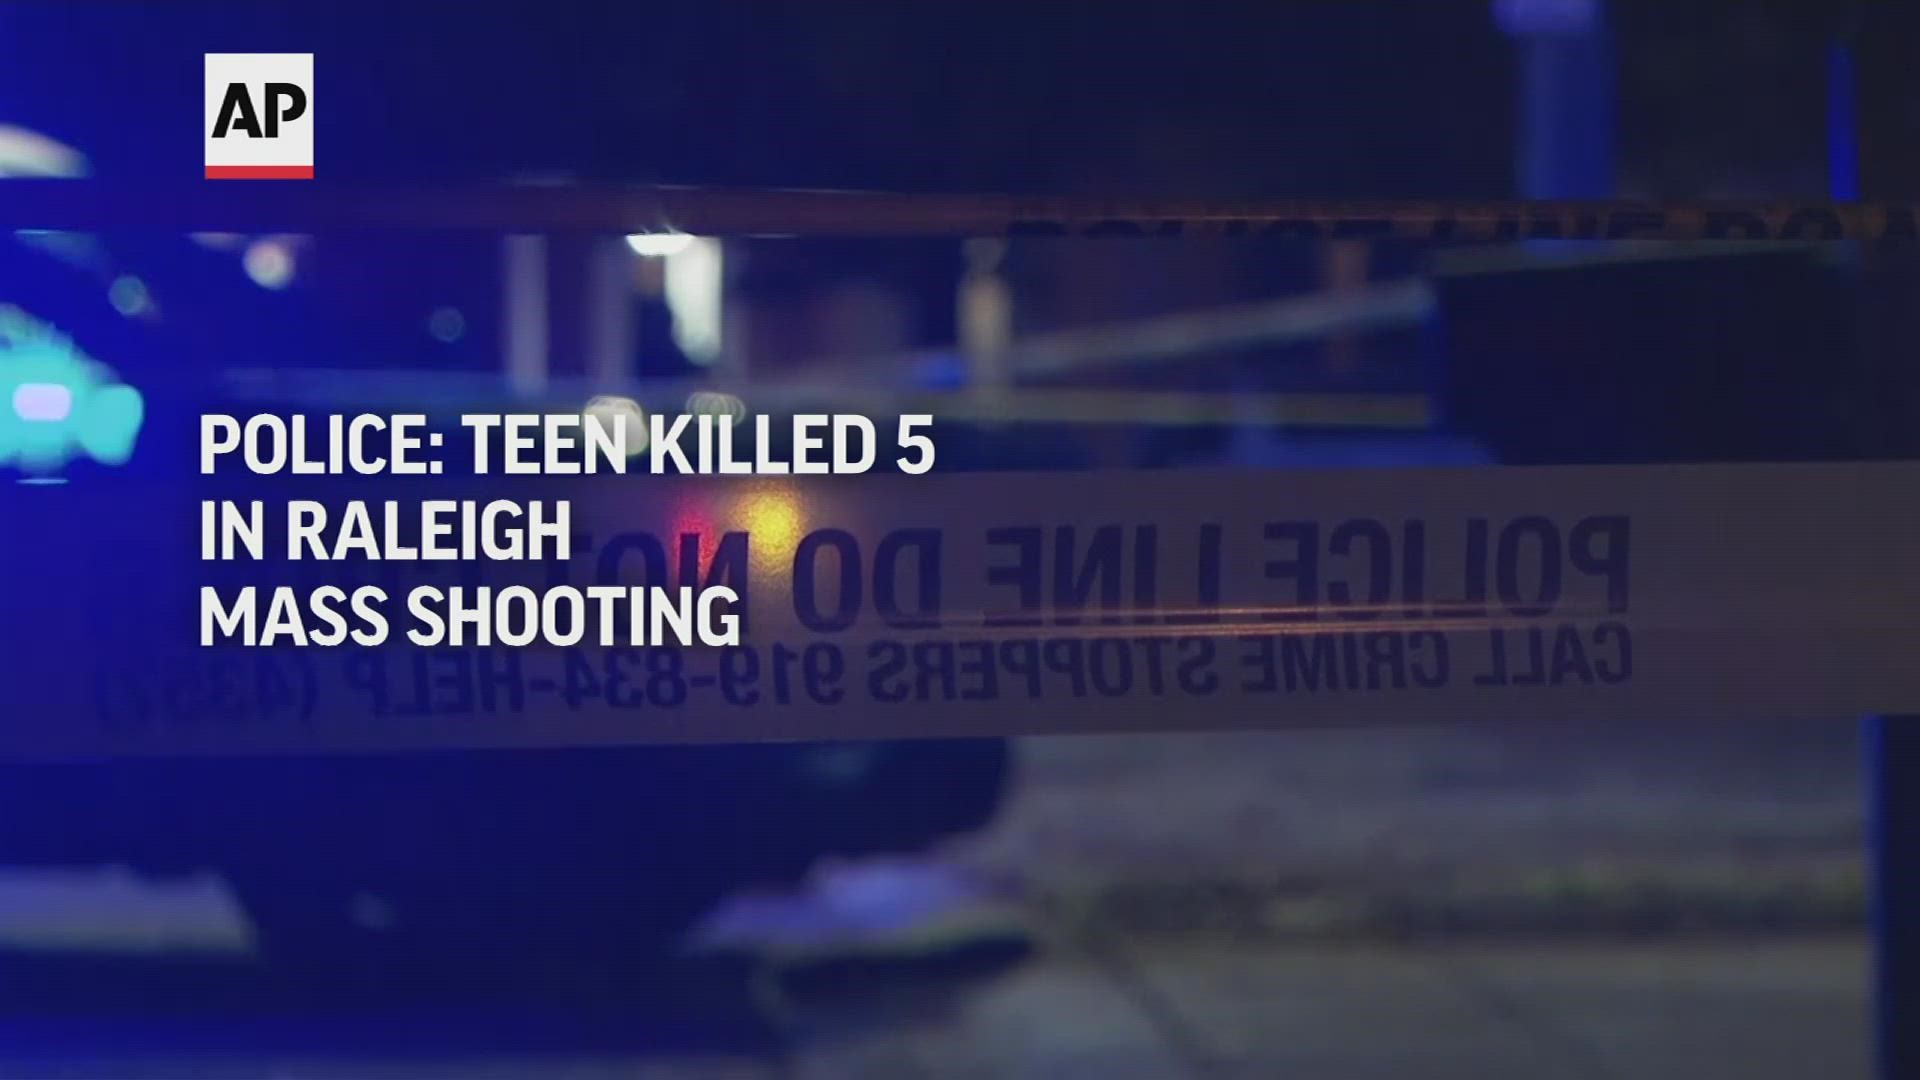 Police say a 15-year-old fatally shot two people in the streets of a neighborhood in North Carolina's capital city, then fled to a walking trail and killed 3 others.